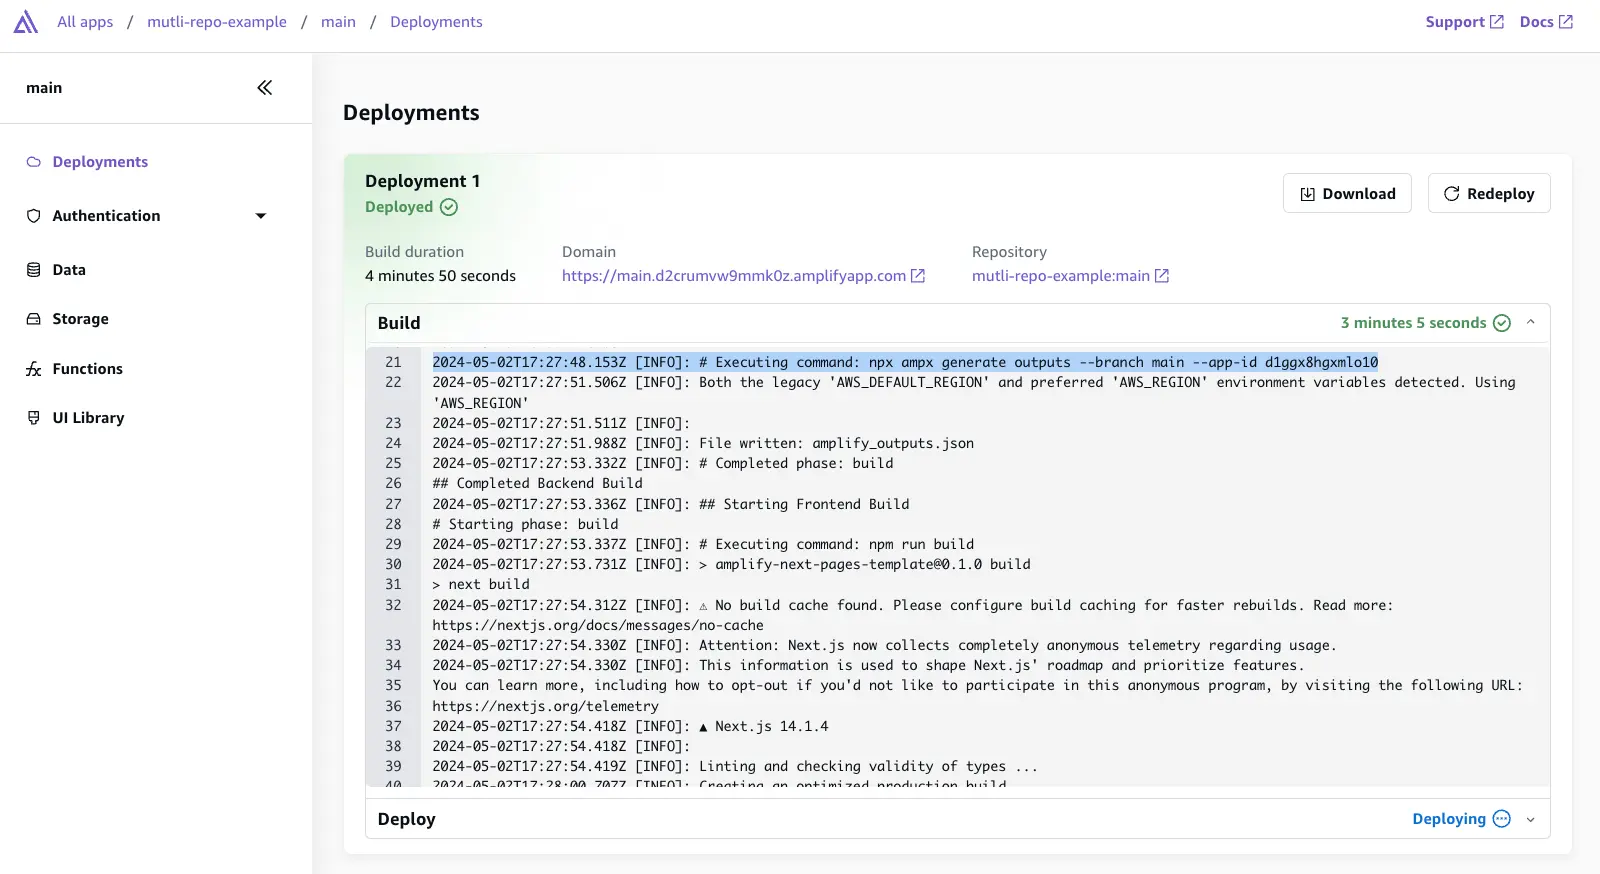 Screenshot of the Deployments page in the Amplify console showing the build of the app